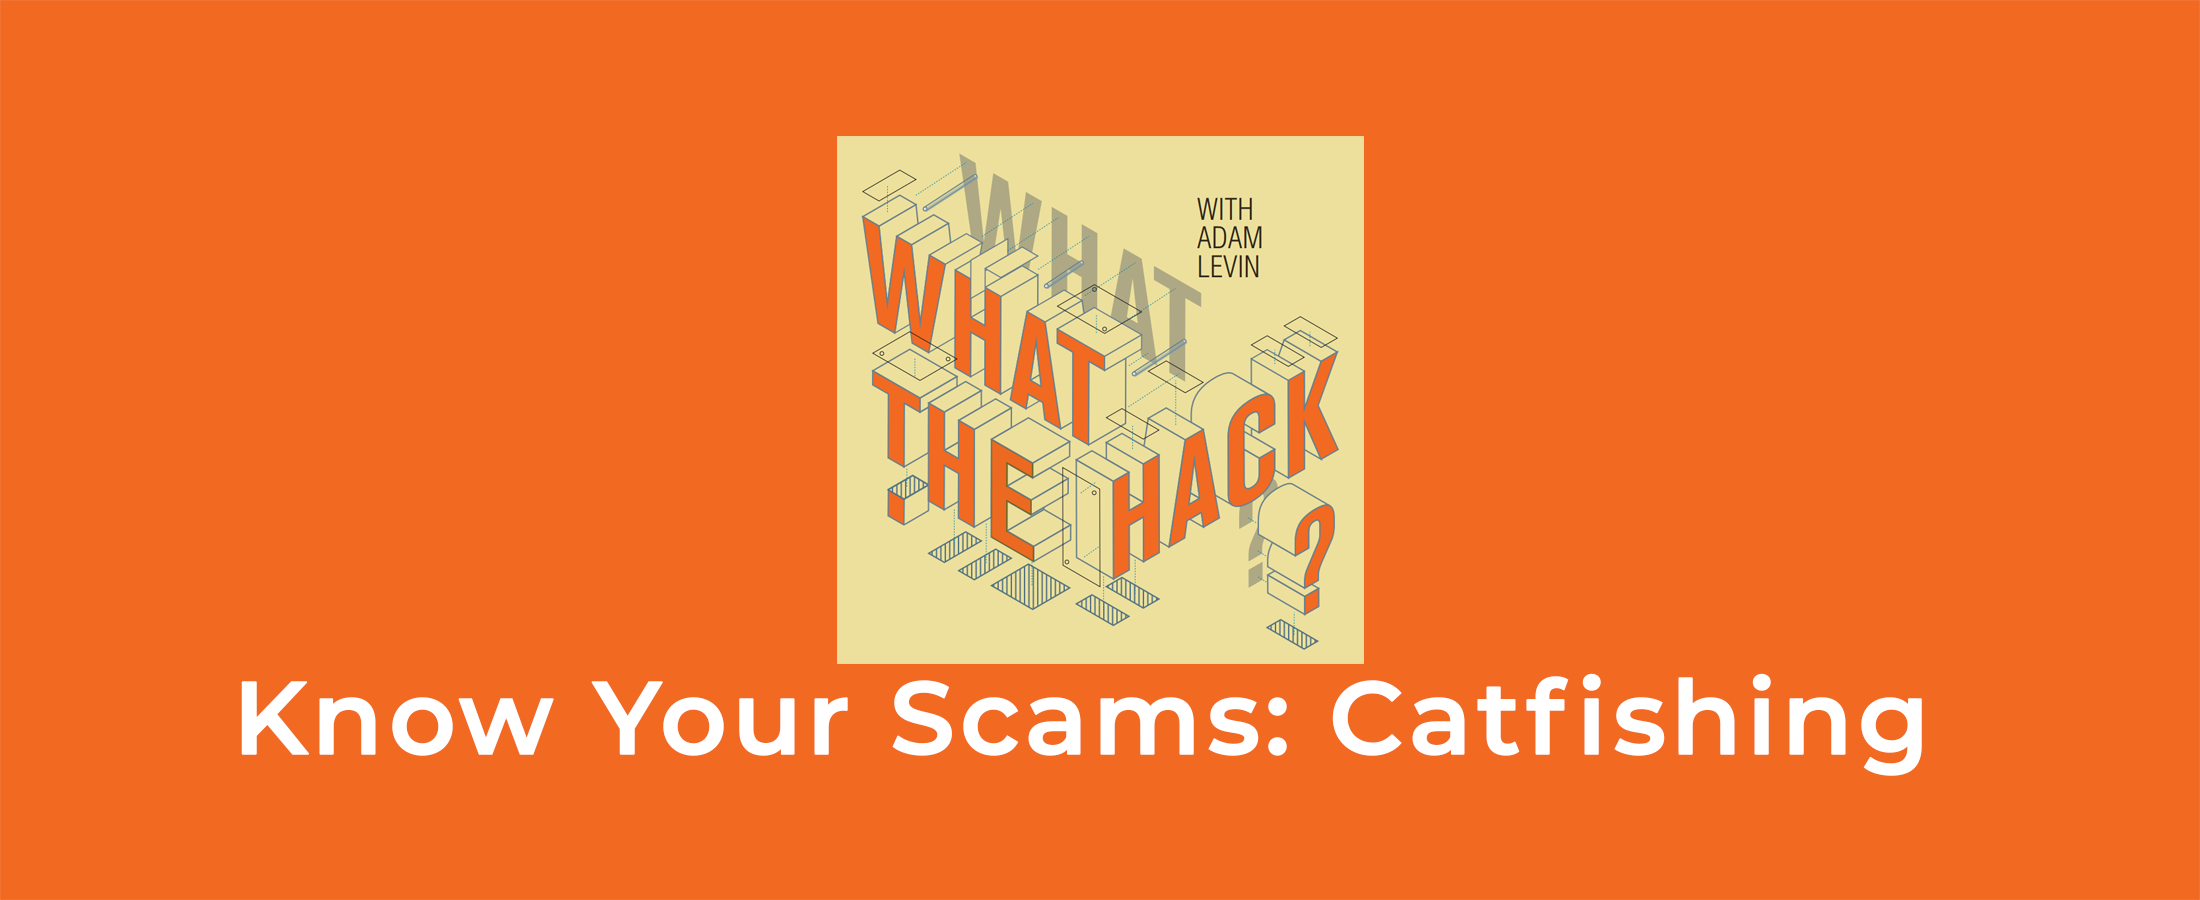 Know Your Scams: Catfishing